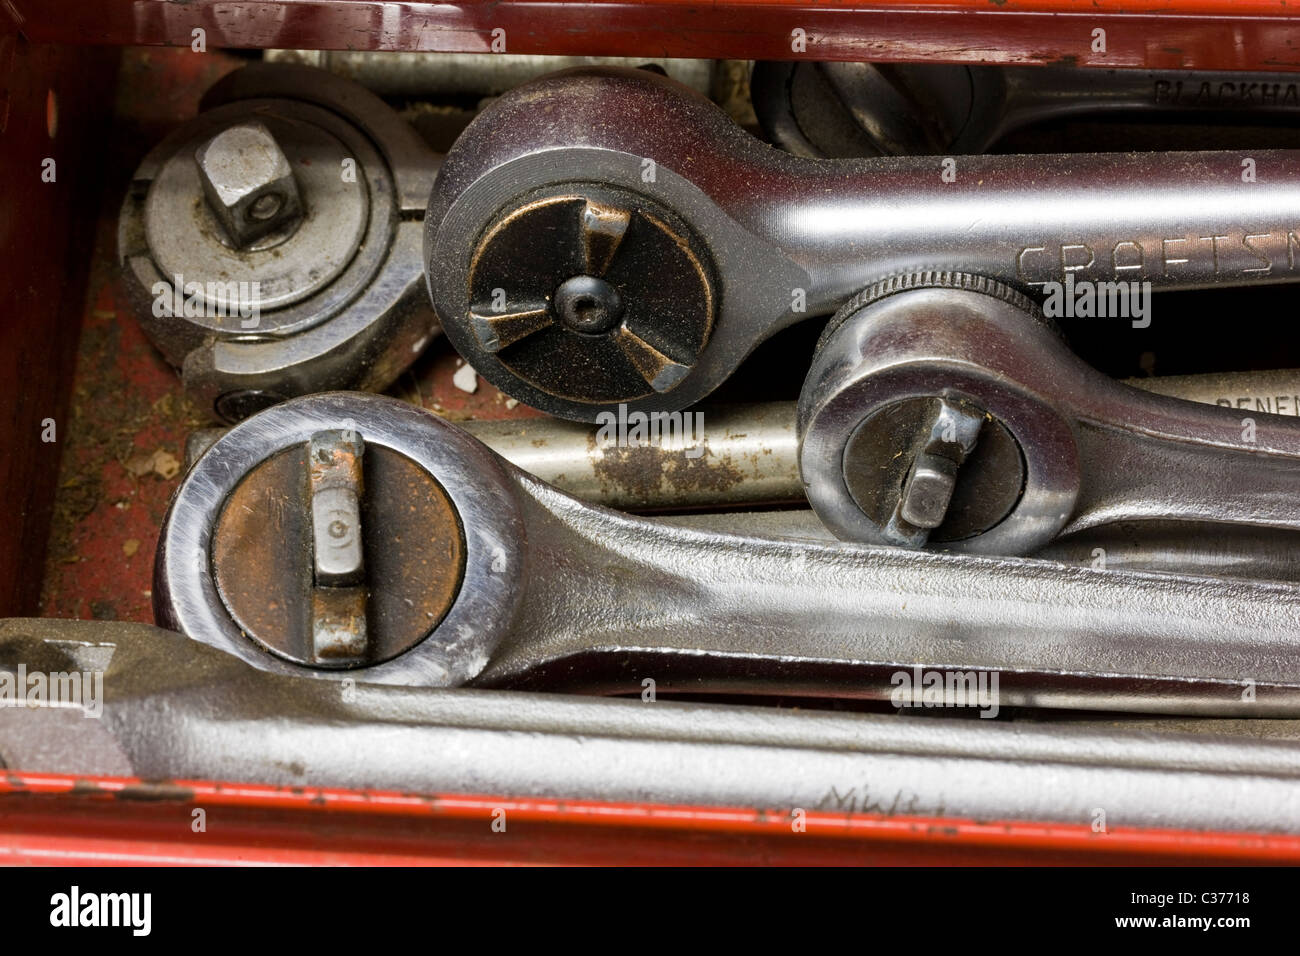 Automotive mechanic's tools in a tool chest Stock Photo